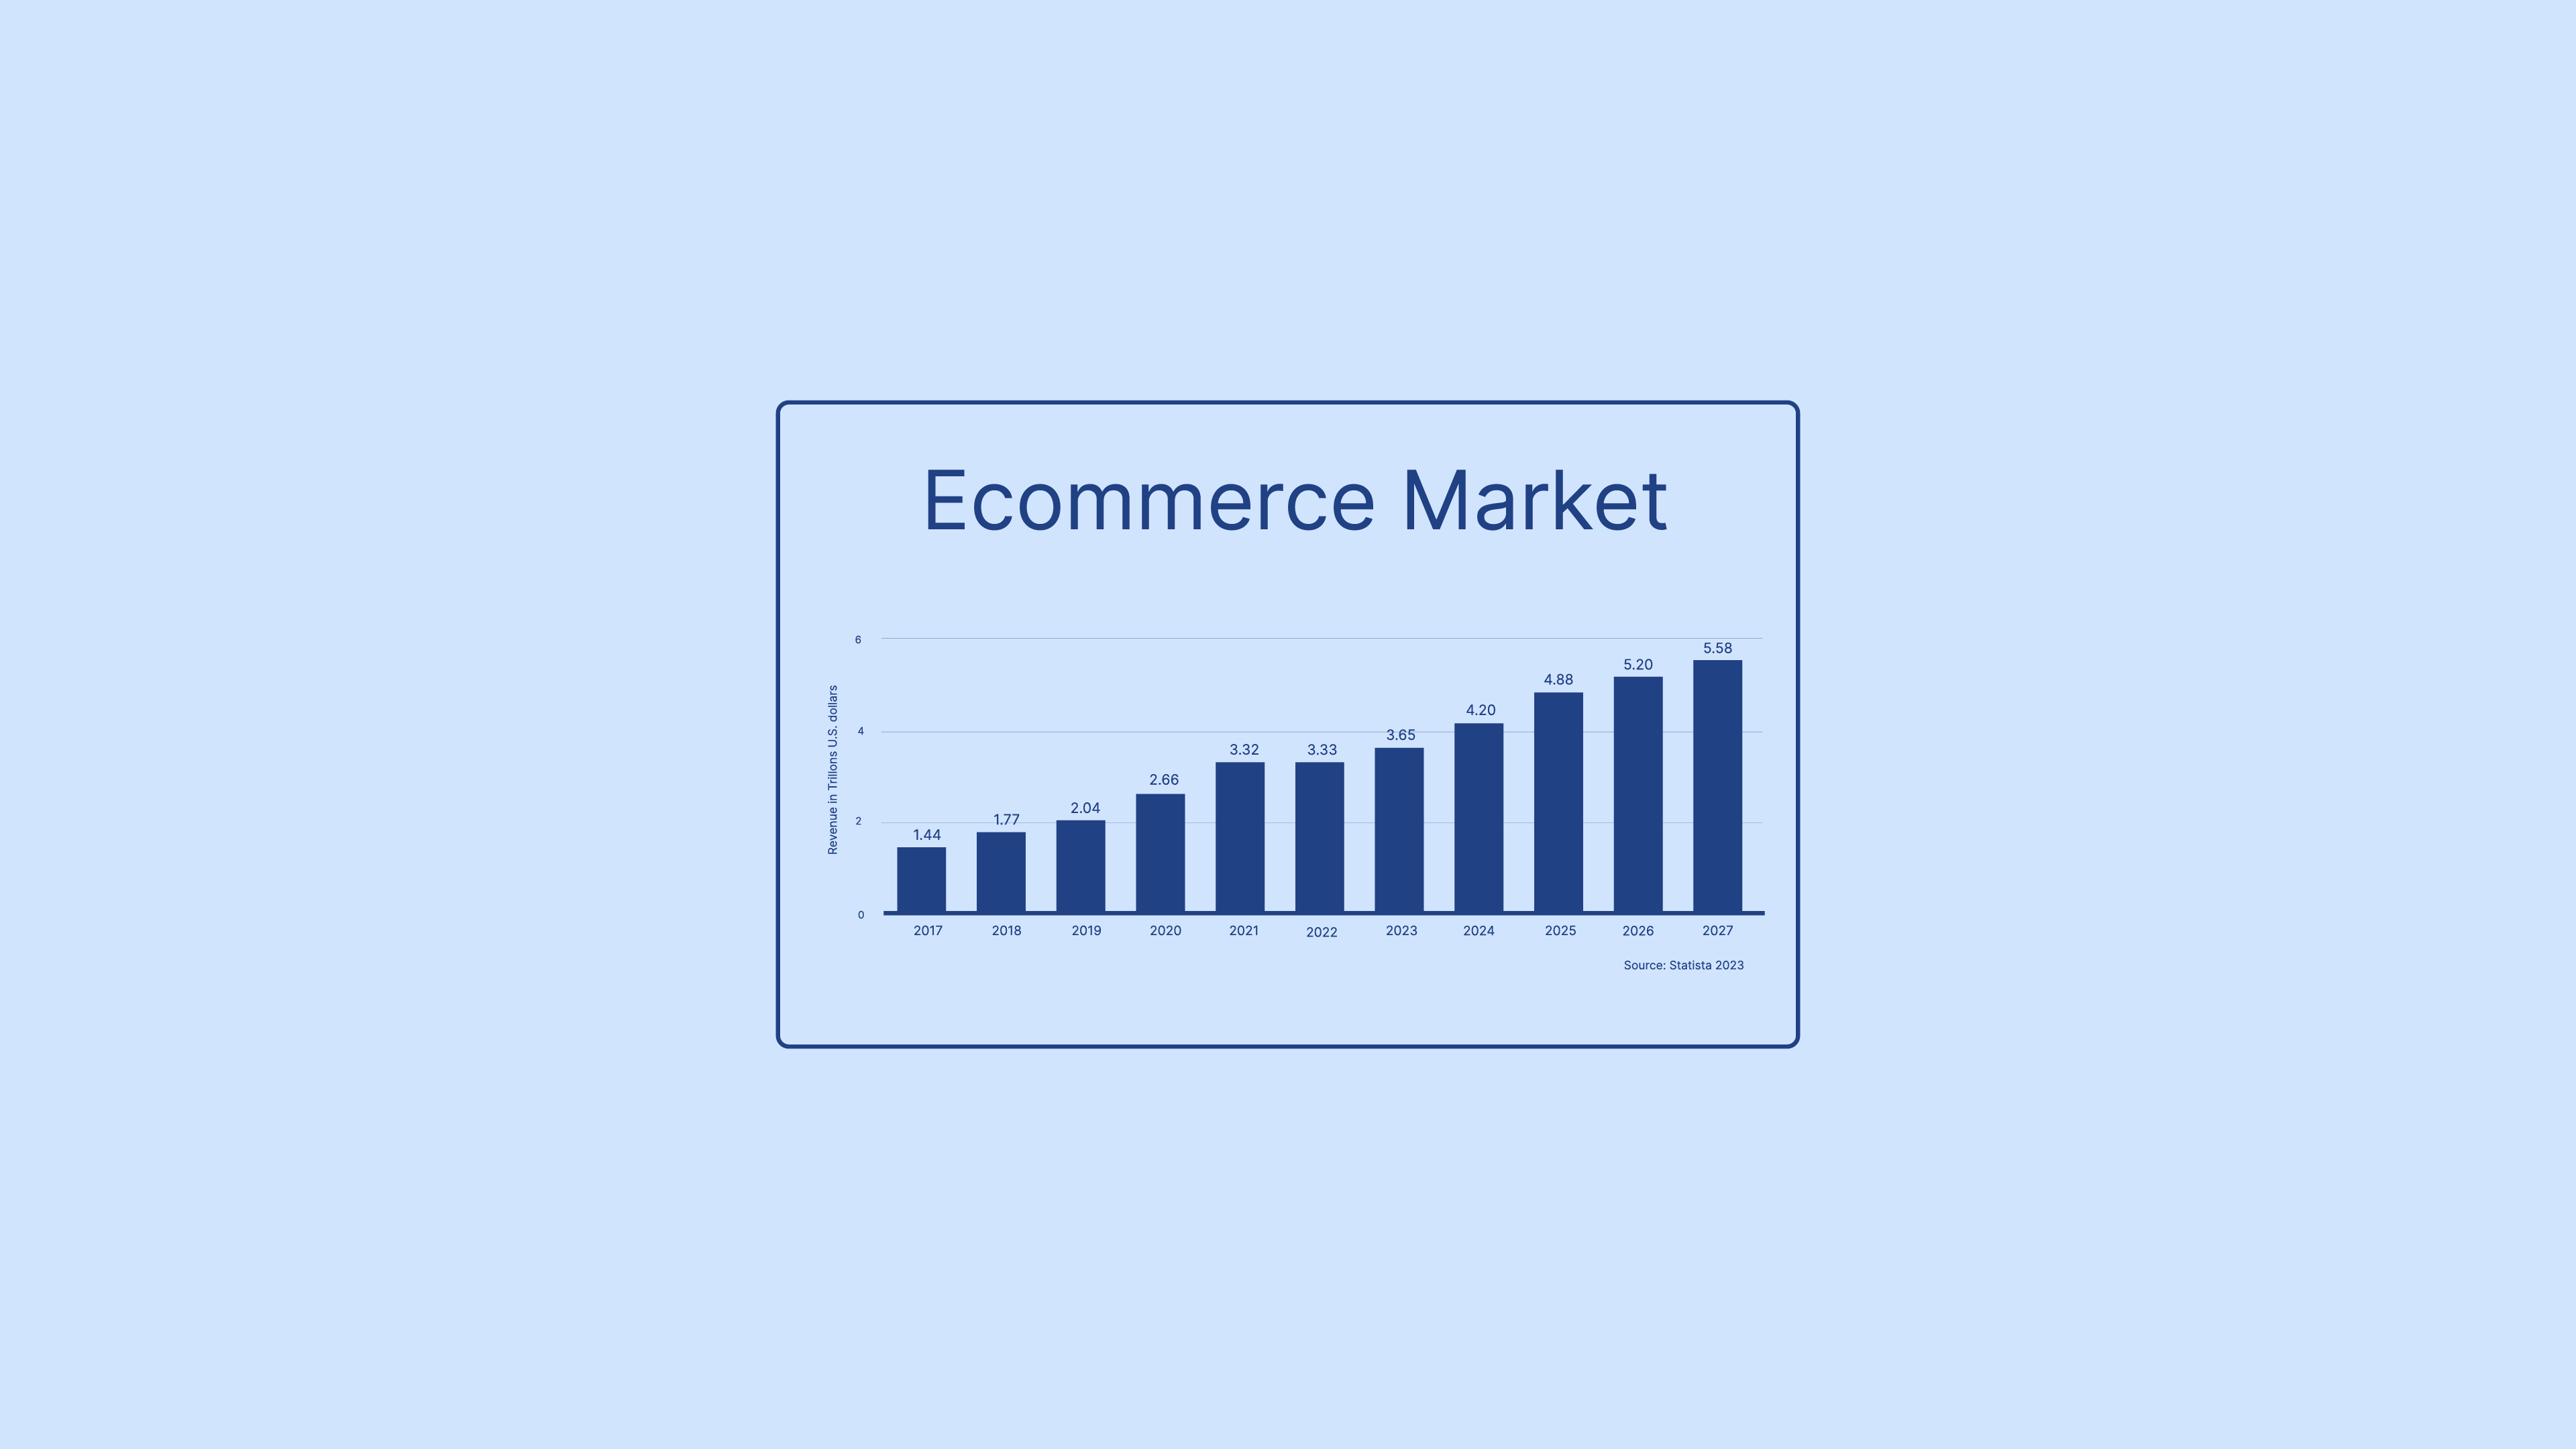 Global ecommerce market for physical goods@2x